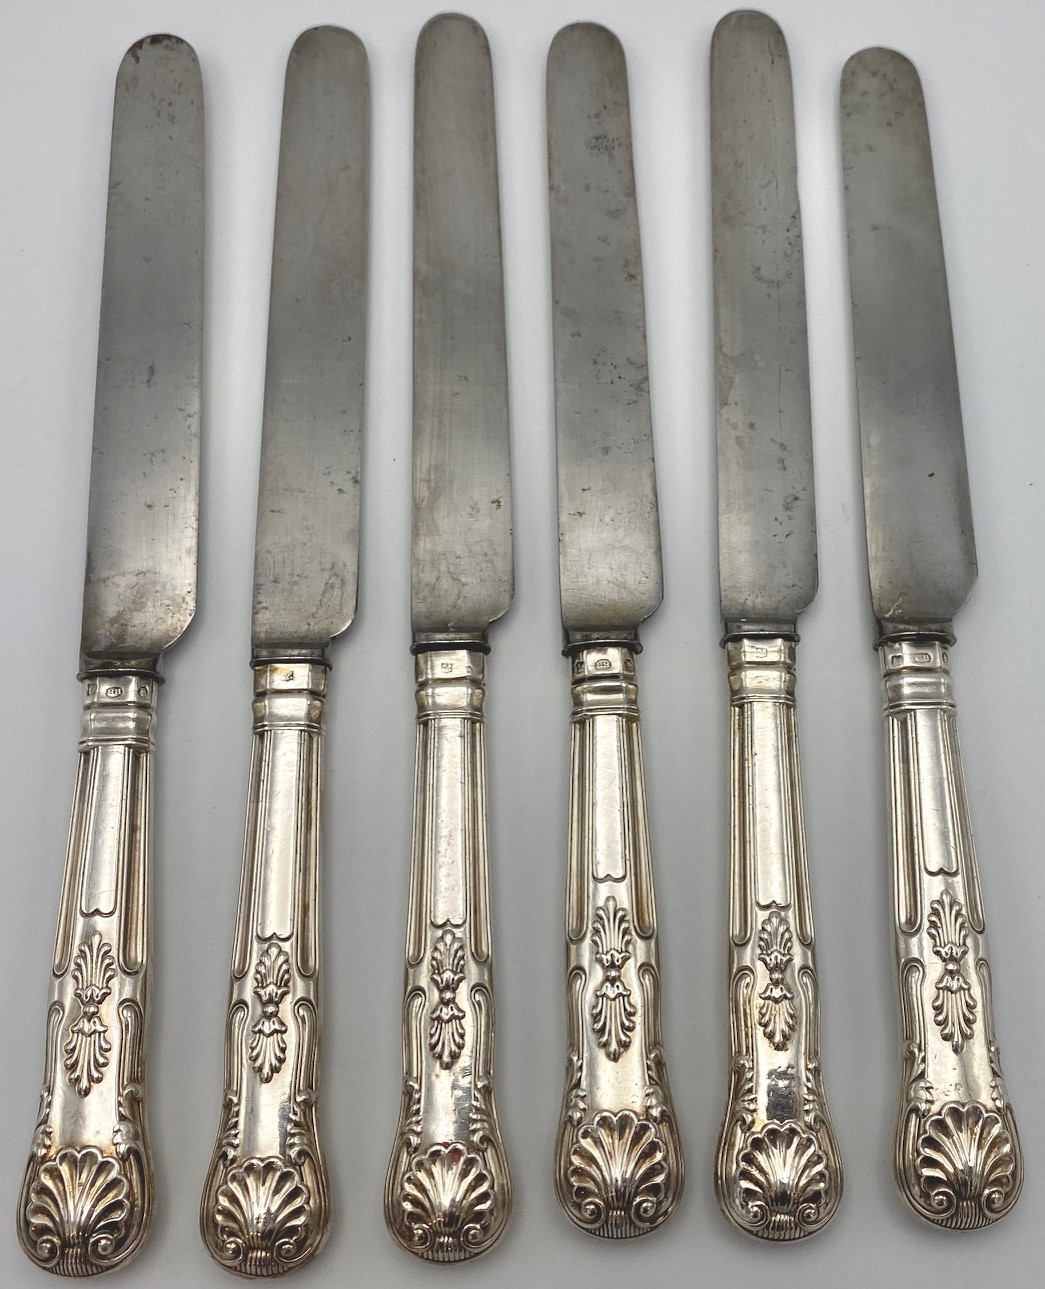 Six Victorian steel dinner knives with silver clad Kings pattern handles engraved with arms of crown